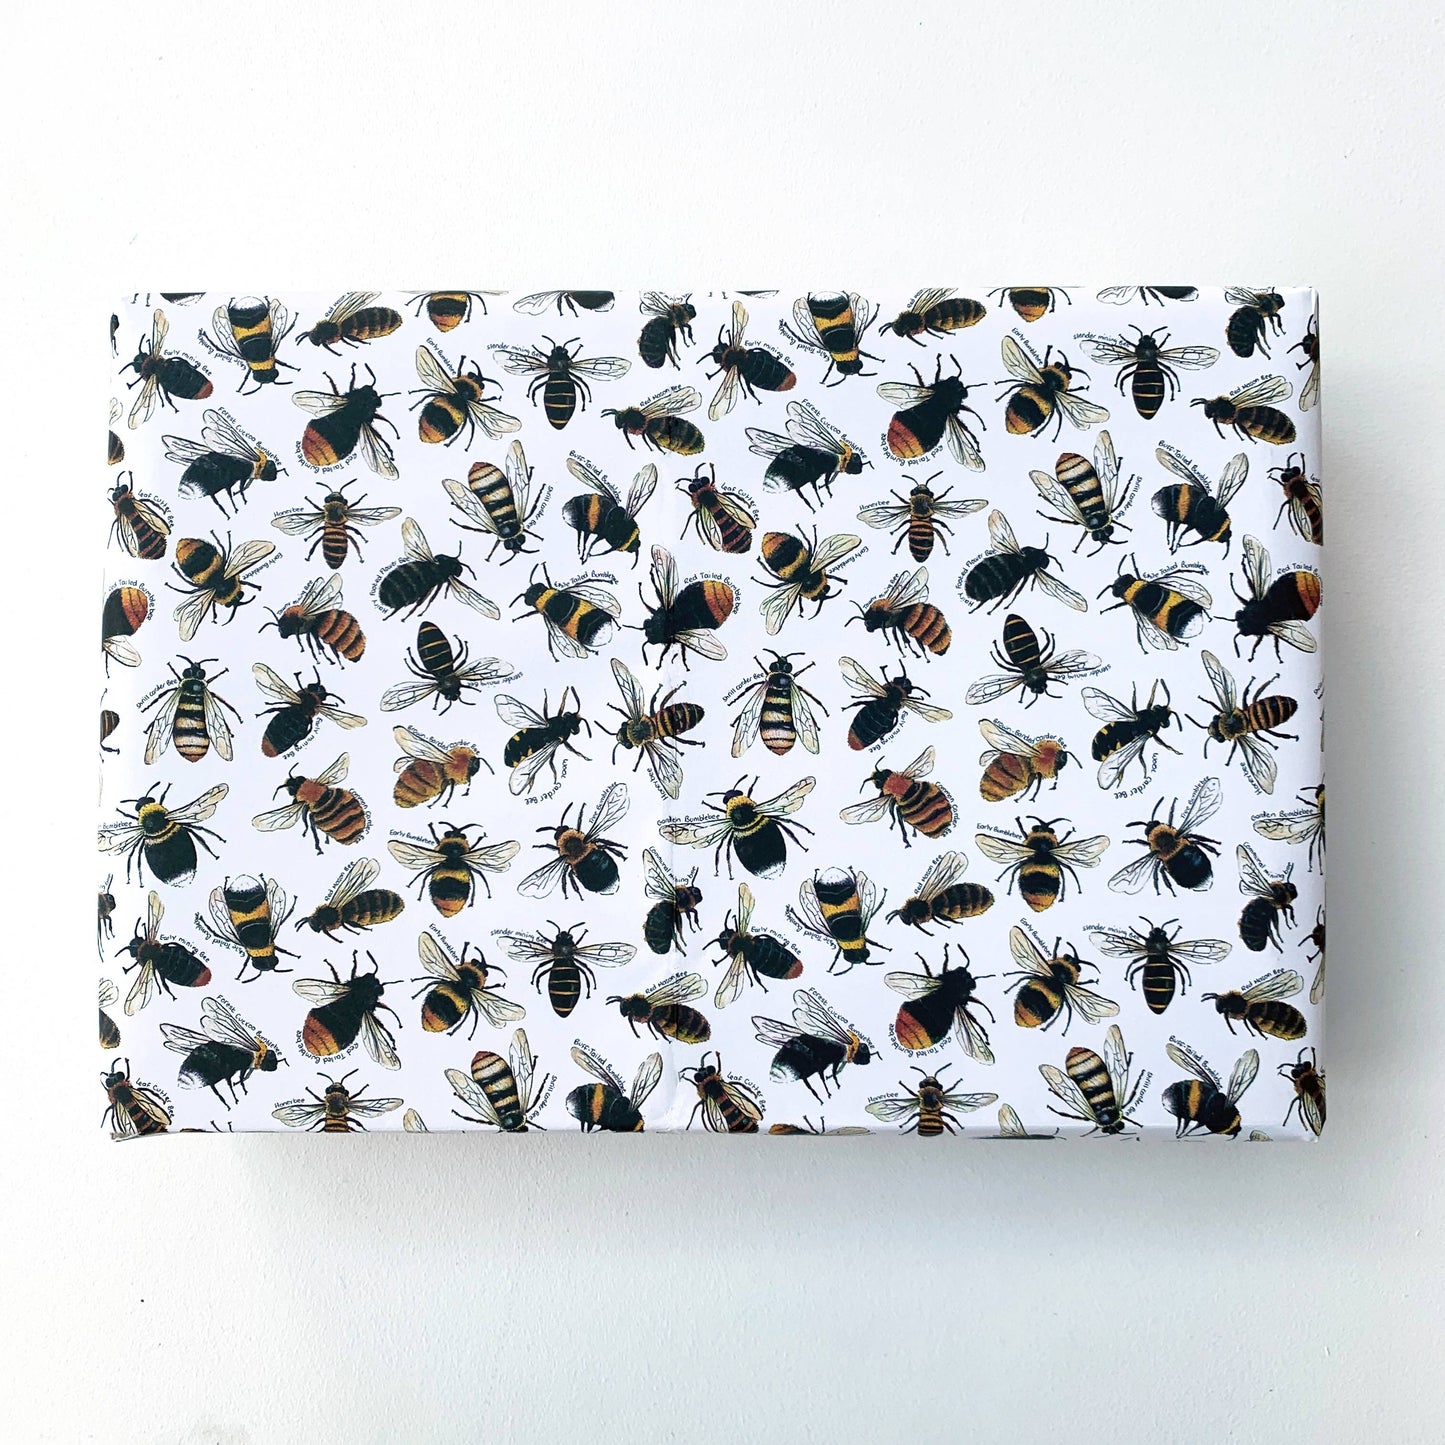 Bees of Britain wrapping paper Sheets